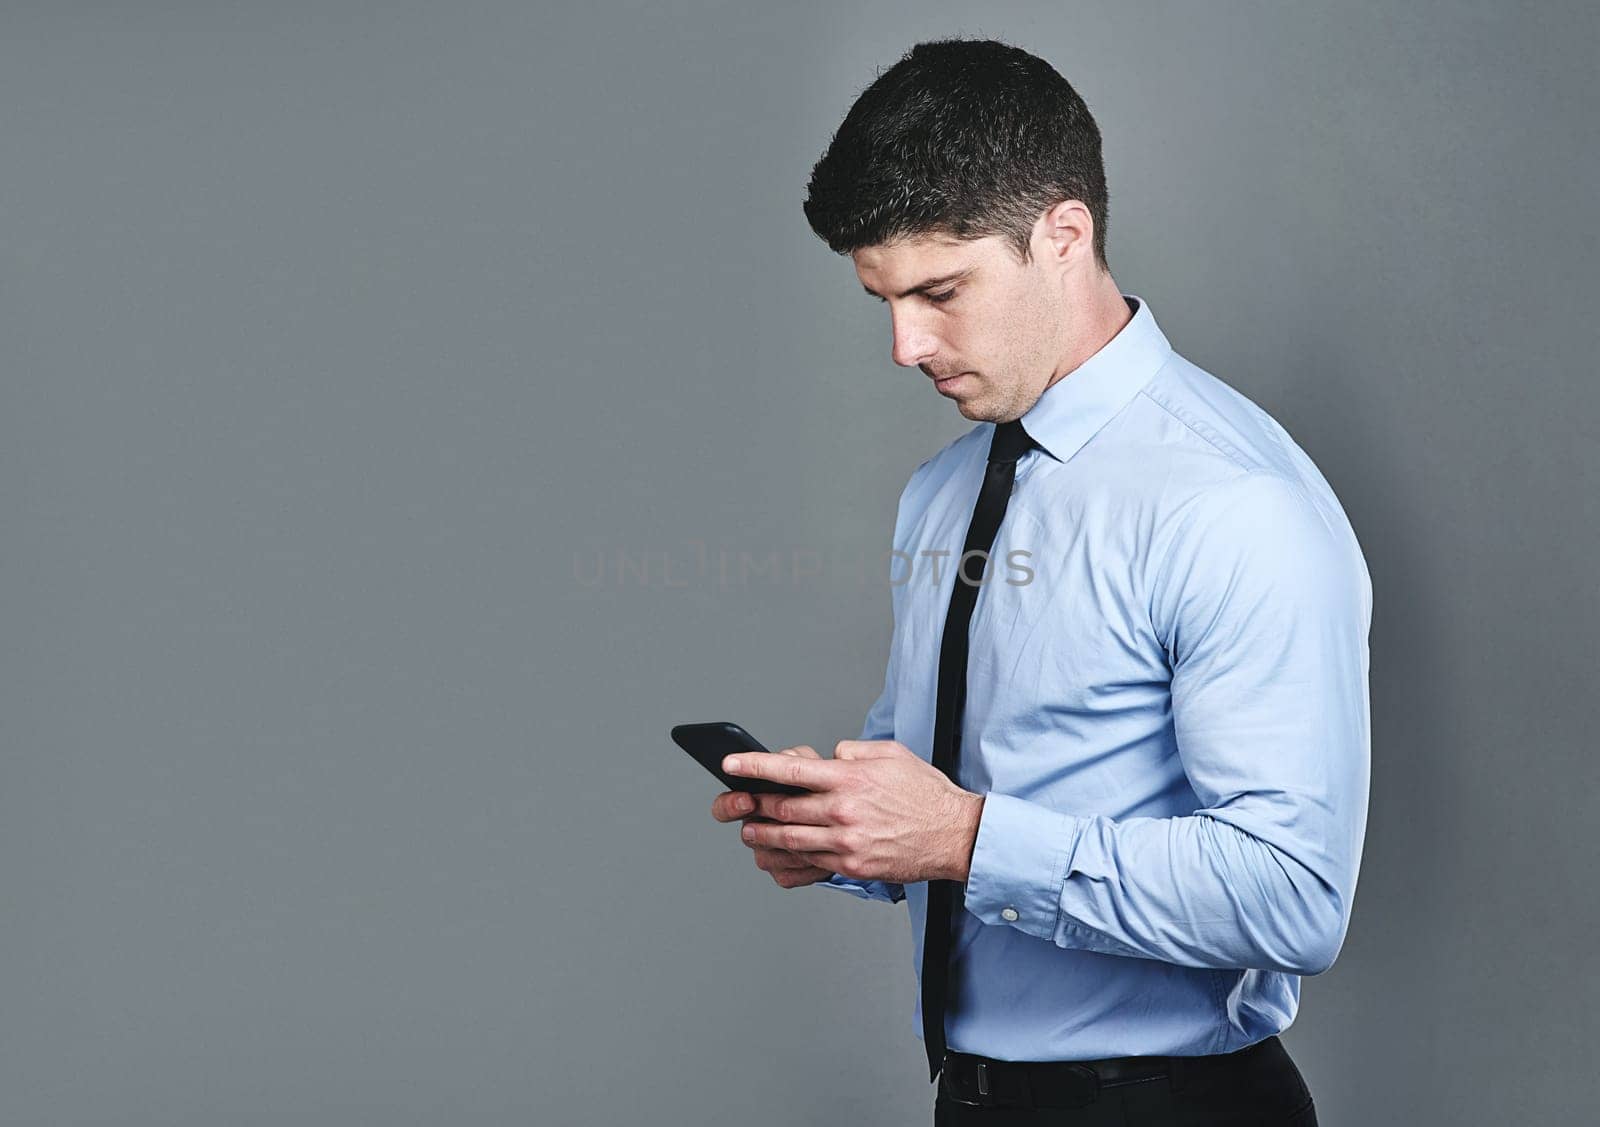 Its essential to maintain communication with clients. Studio shot of a young businessman texting on a cellphone against a grey background. by YuriArcurs